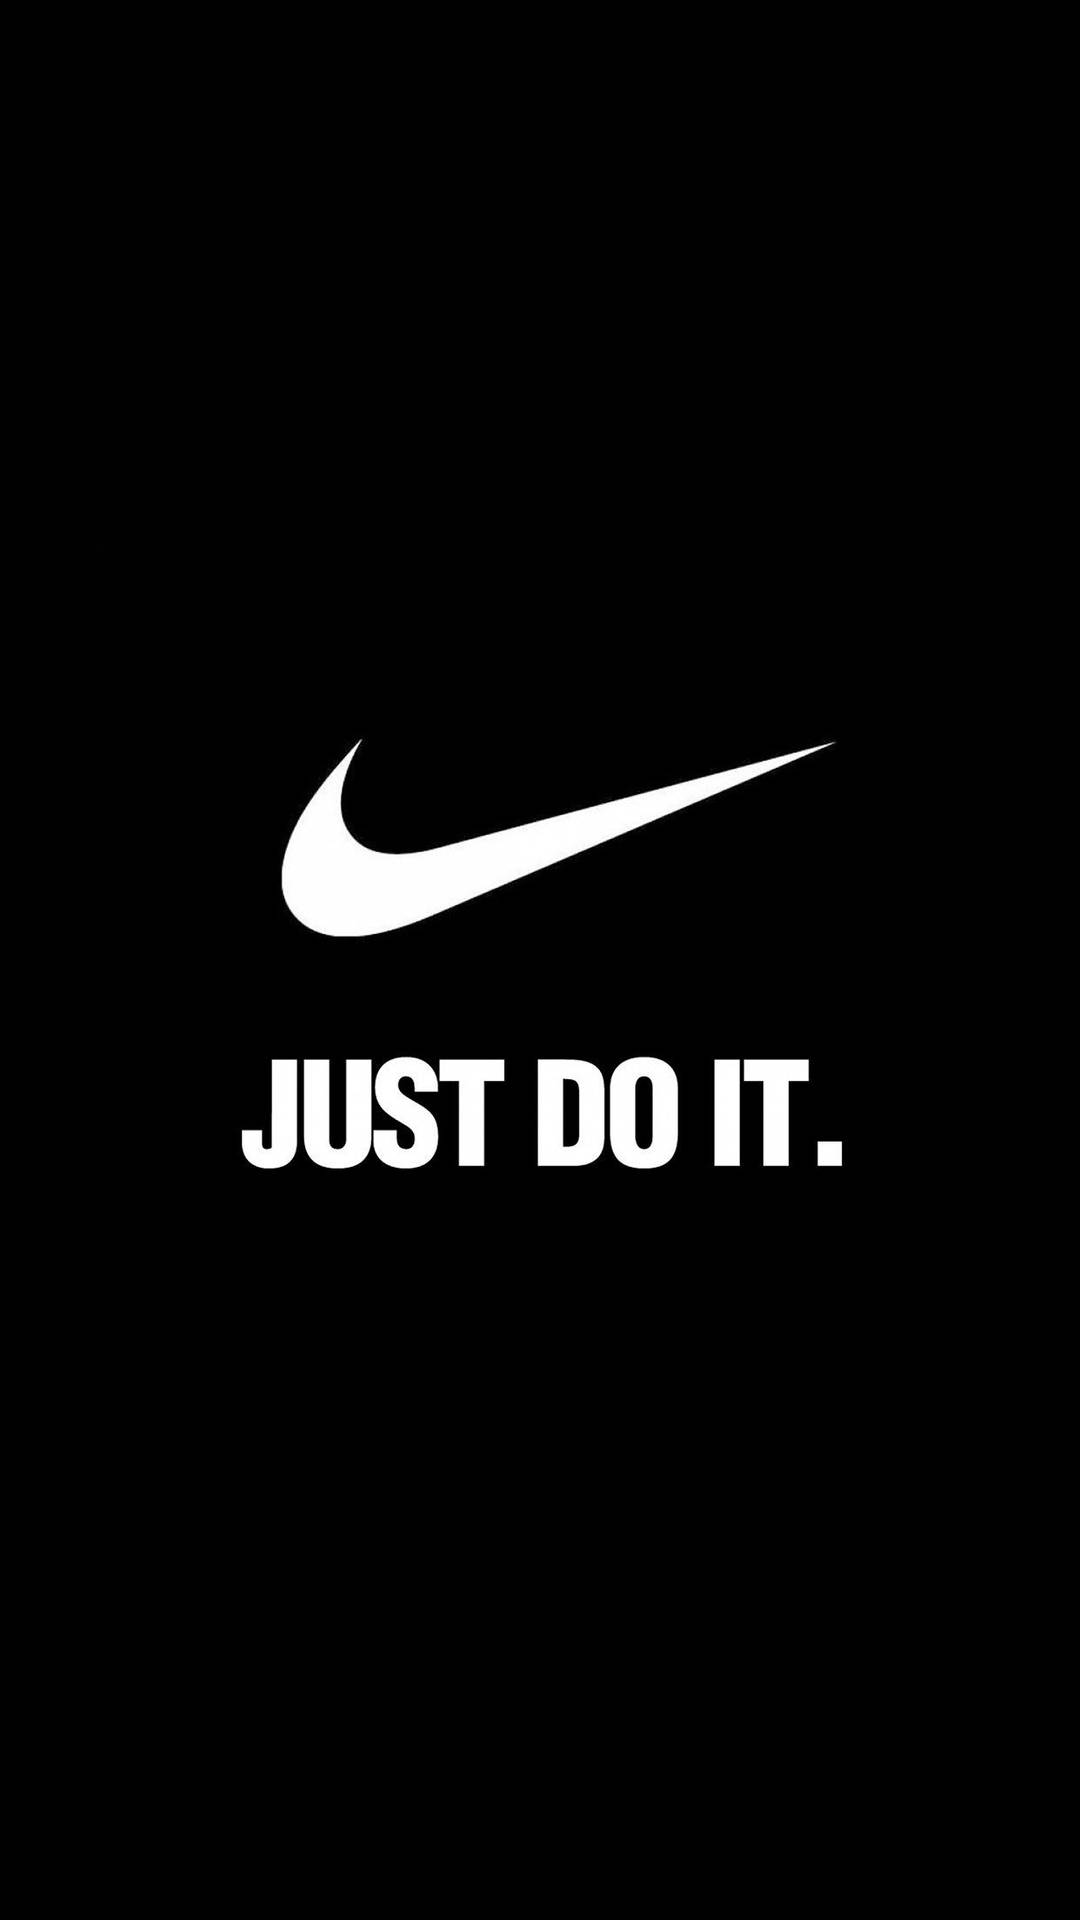 Nike Brand Just Do It